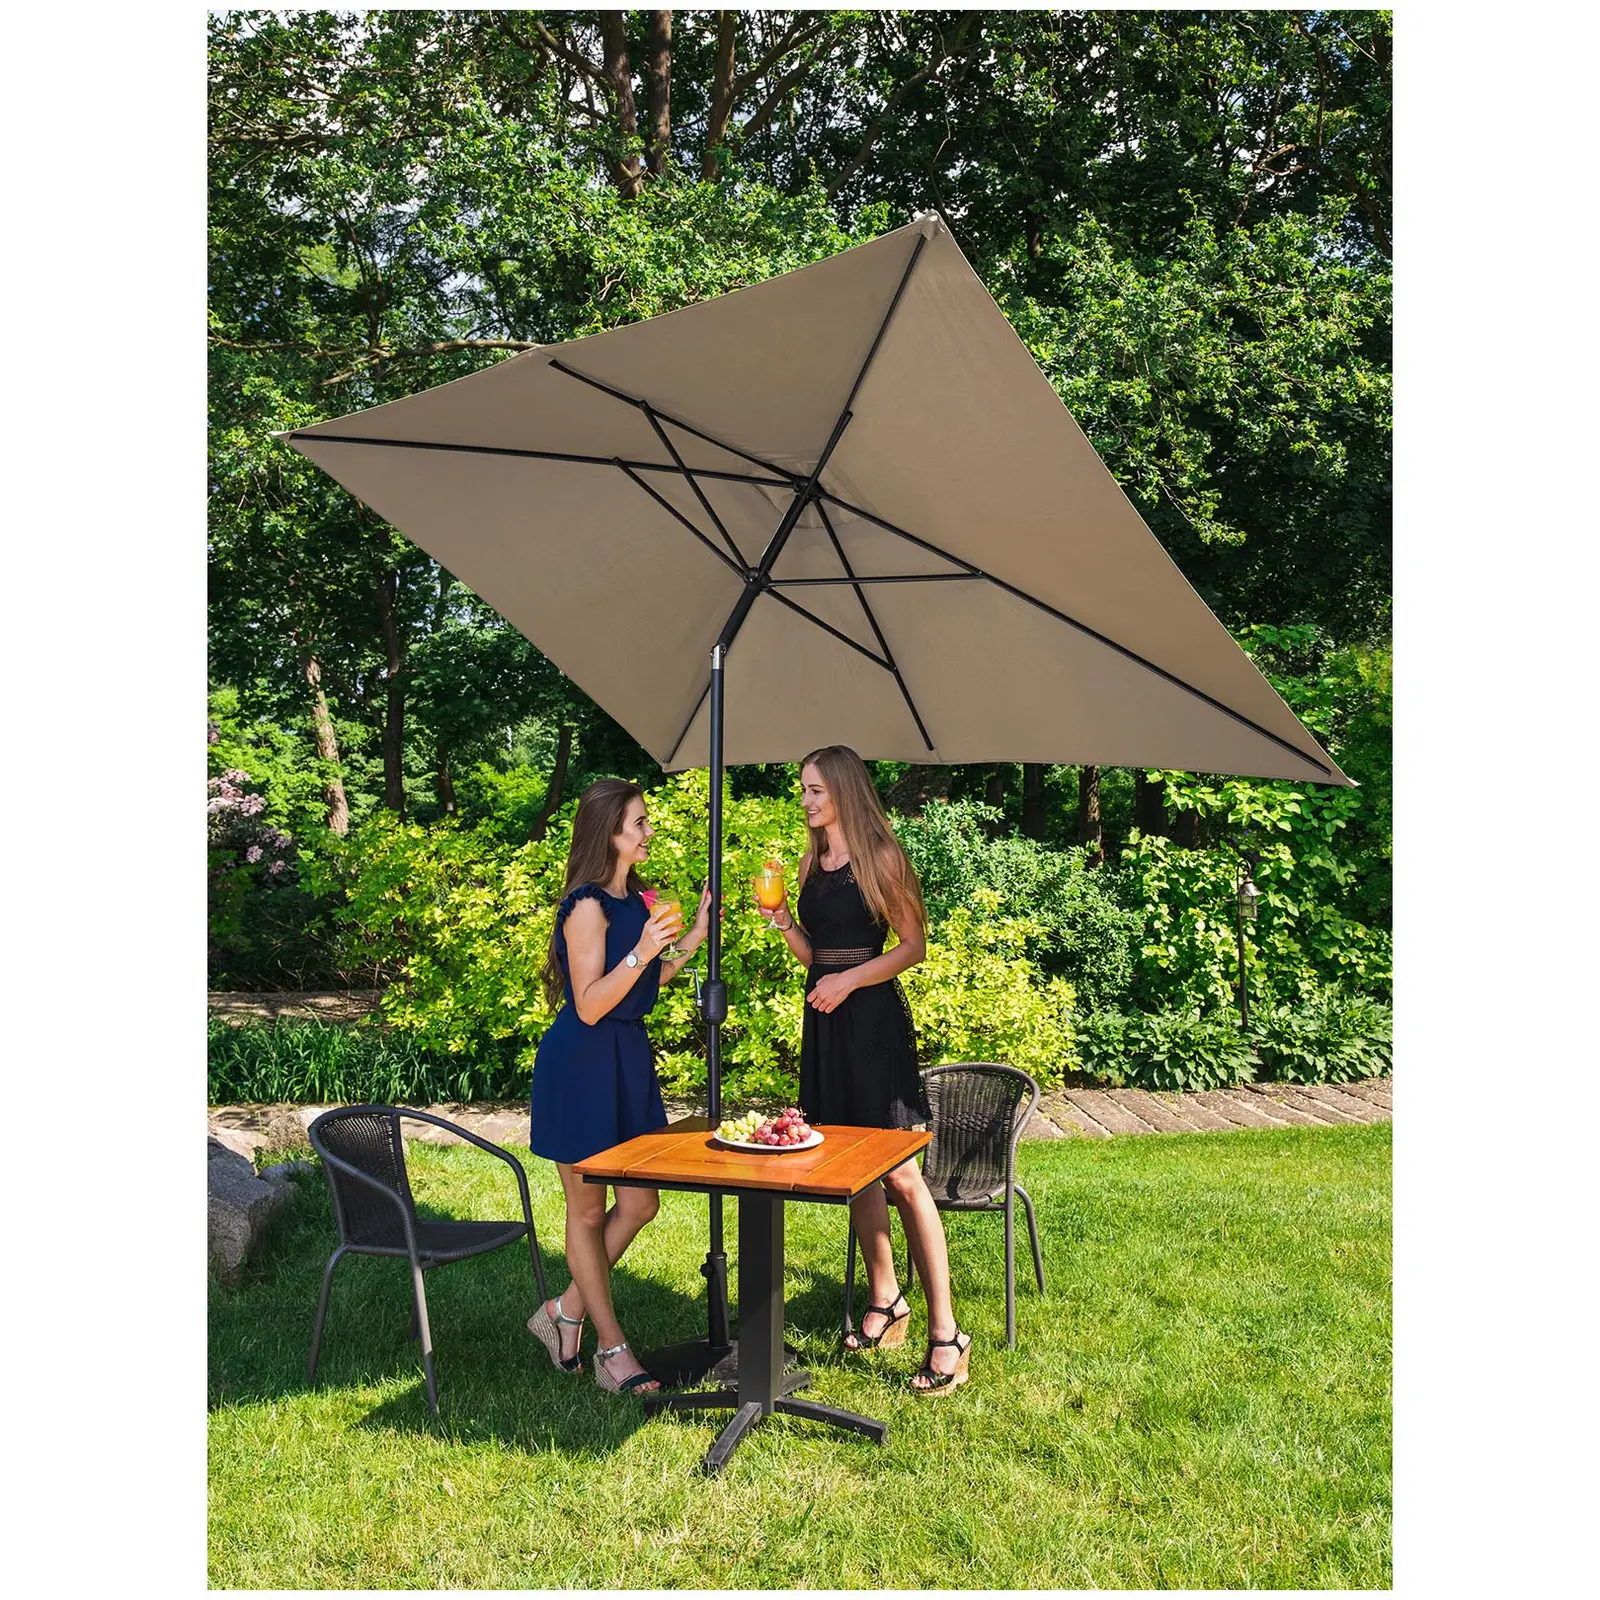 Grand parasol - Taupe - Rectangulaire - 200 x 300 cm - Inclinable